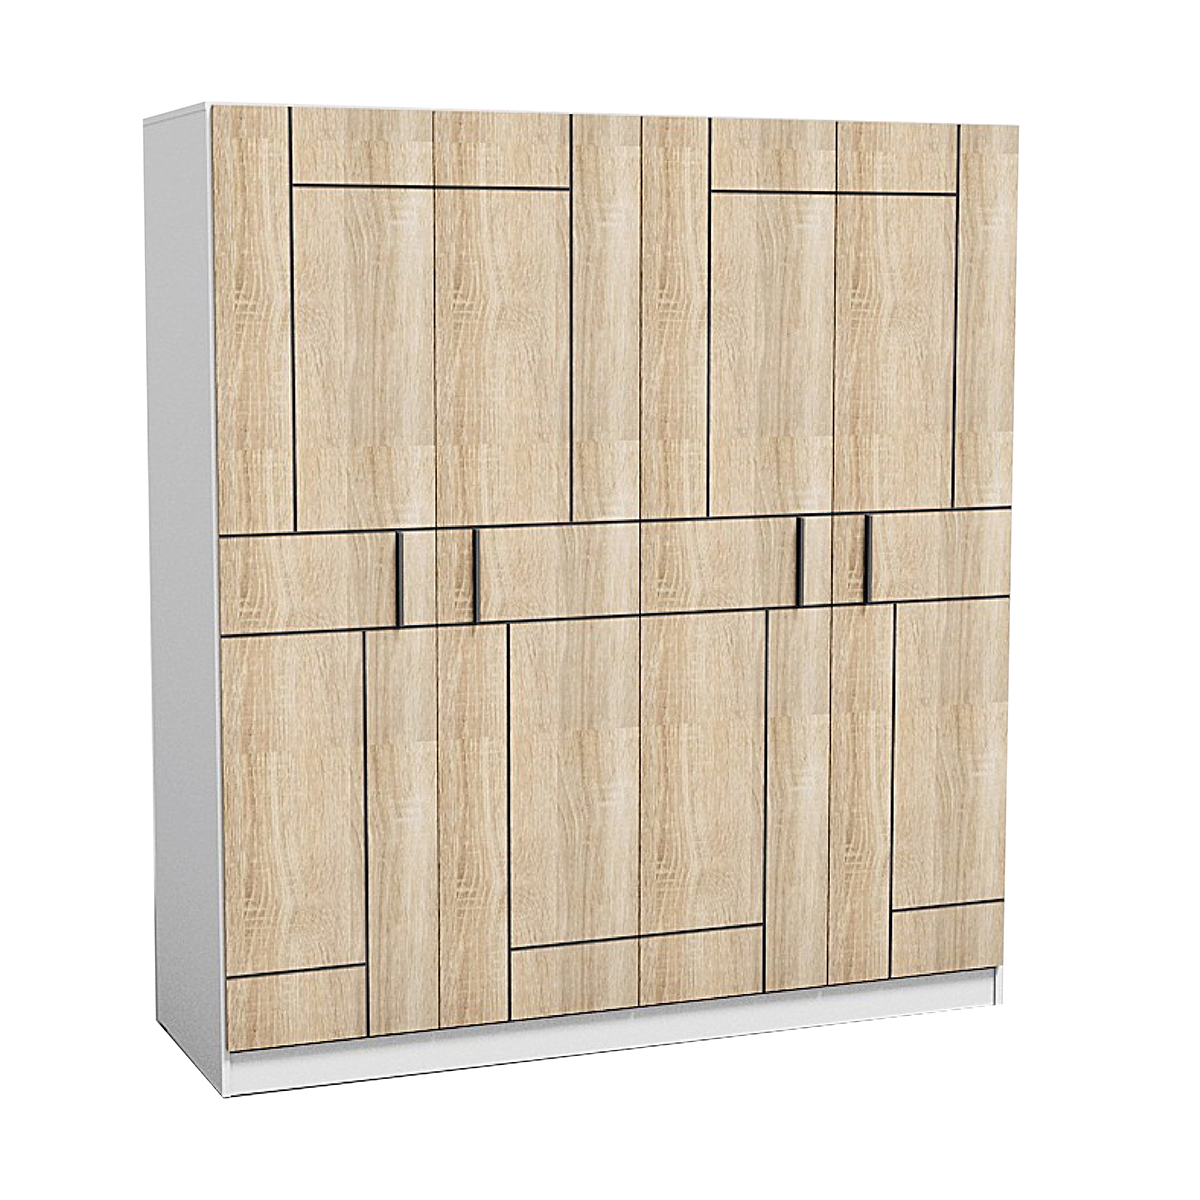 84065::XHB-745::A Sure wardrobe with 4 swing glass doors and 2 drawers. Dimension (WxDxH) cm : 163.8x62x220. Available in Oak SURE Wardrobes SURE Wardrobes SURE Wardrobes SURE Wardrobes SURE Wardrobes SURE Wardrobes SURE Wardrobes